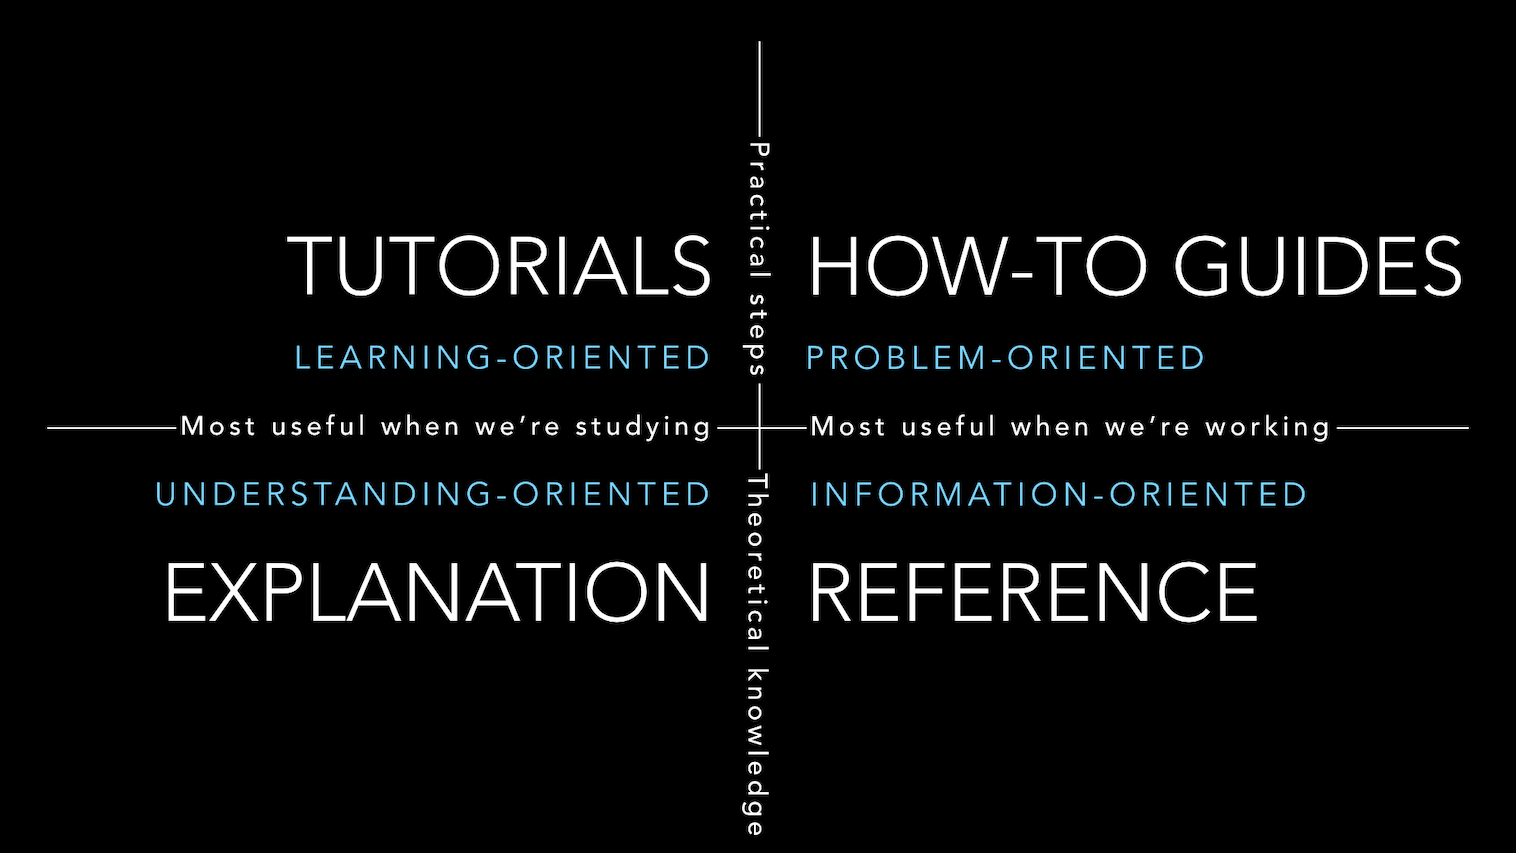 4 quadrants of documentation: tutorials, how-to guides, explanation and
reference.